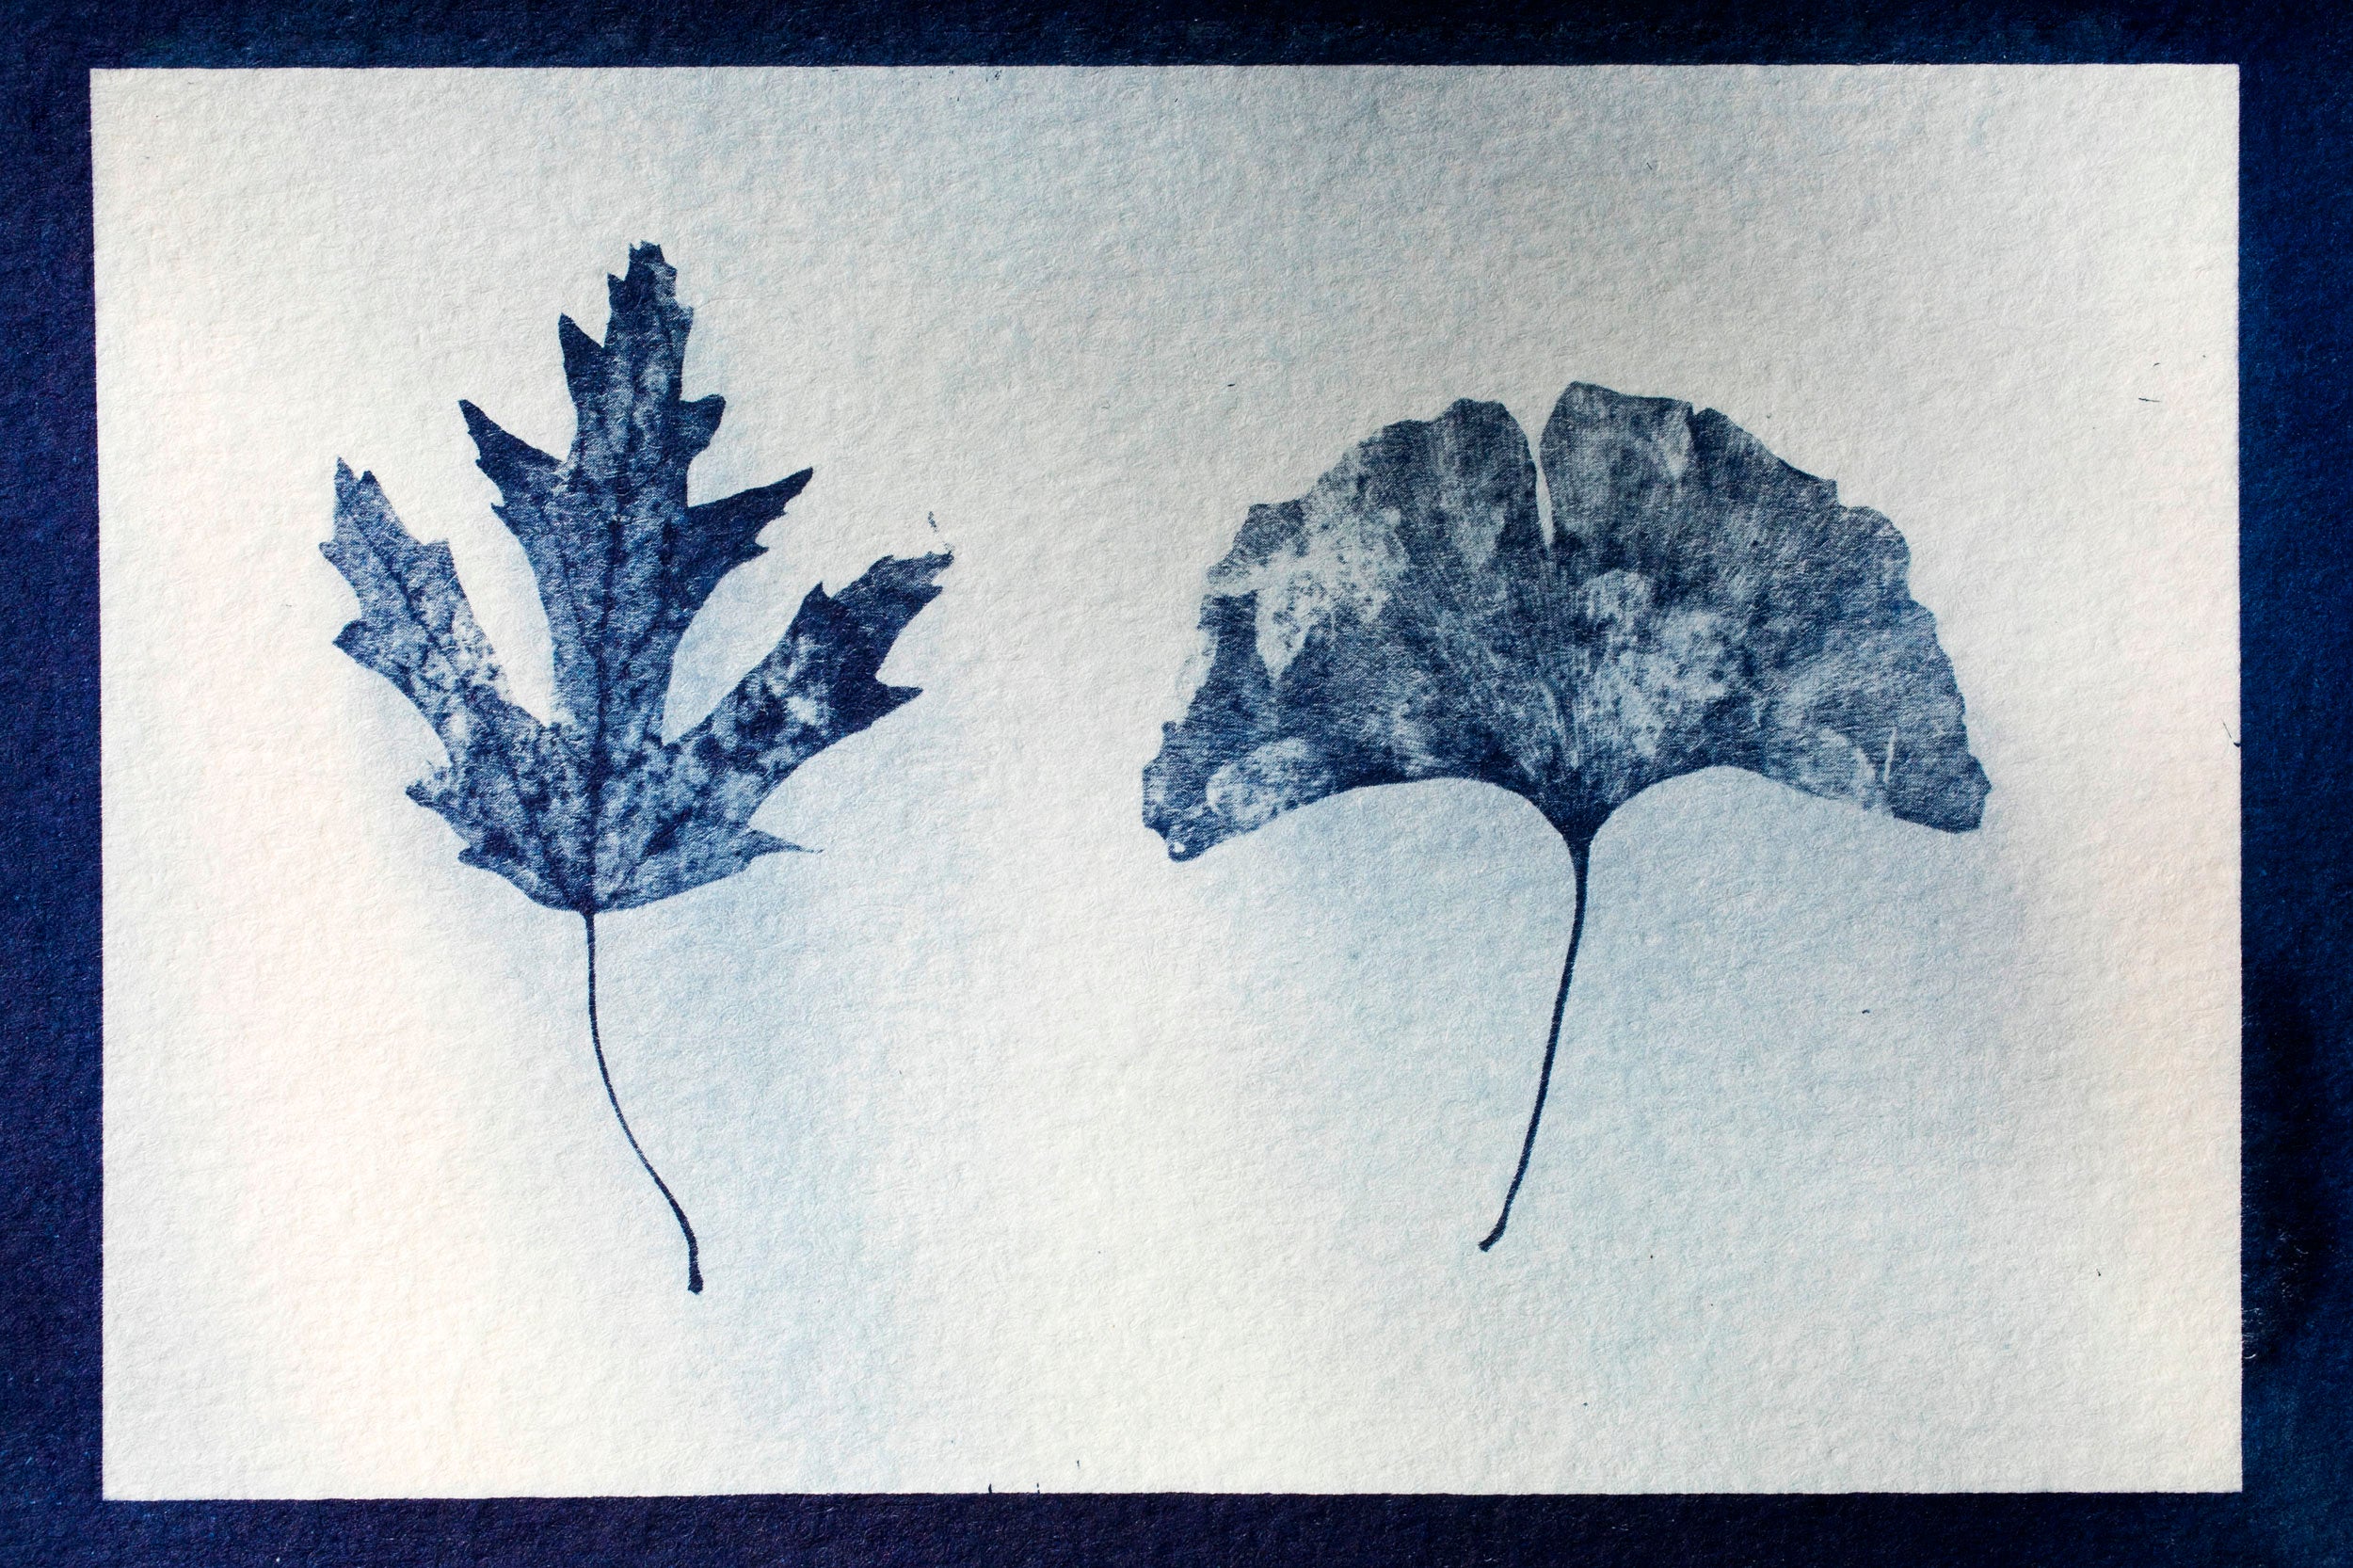 A cyanotype pairs two leaves, a maple and gingko,